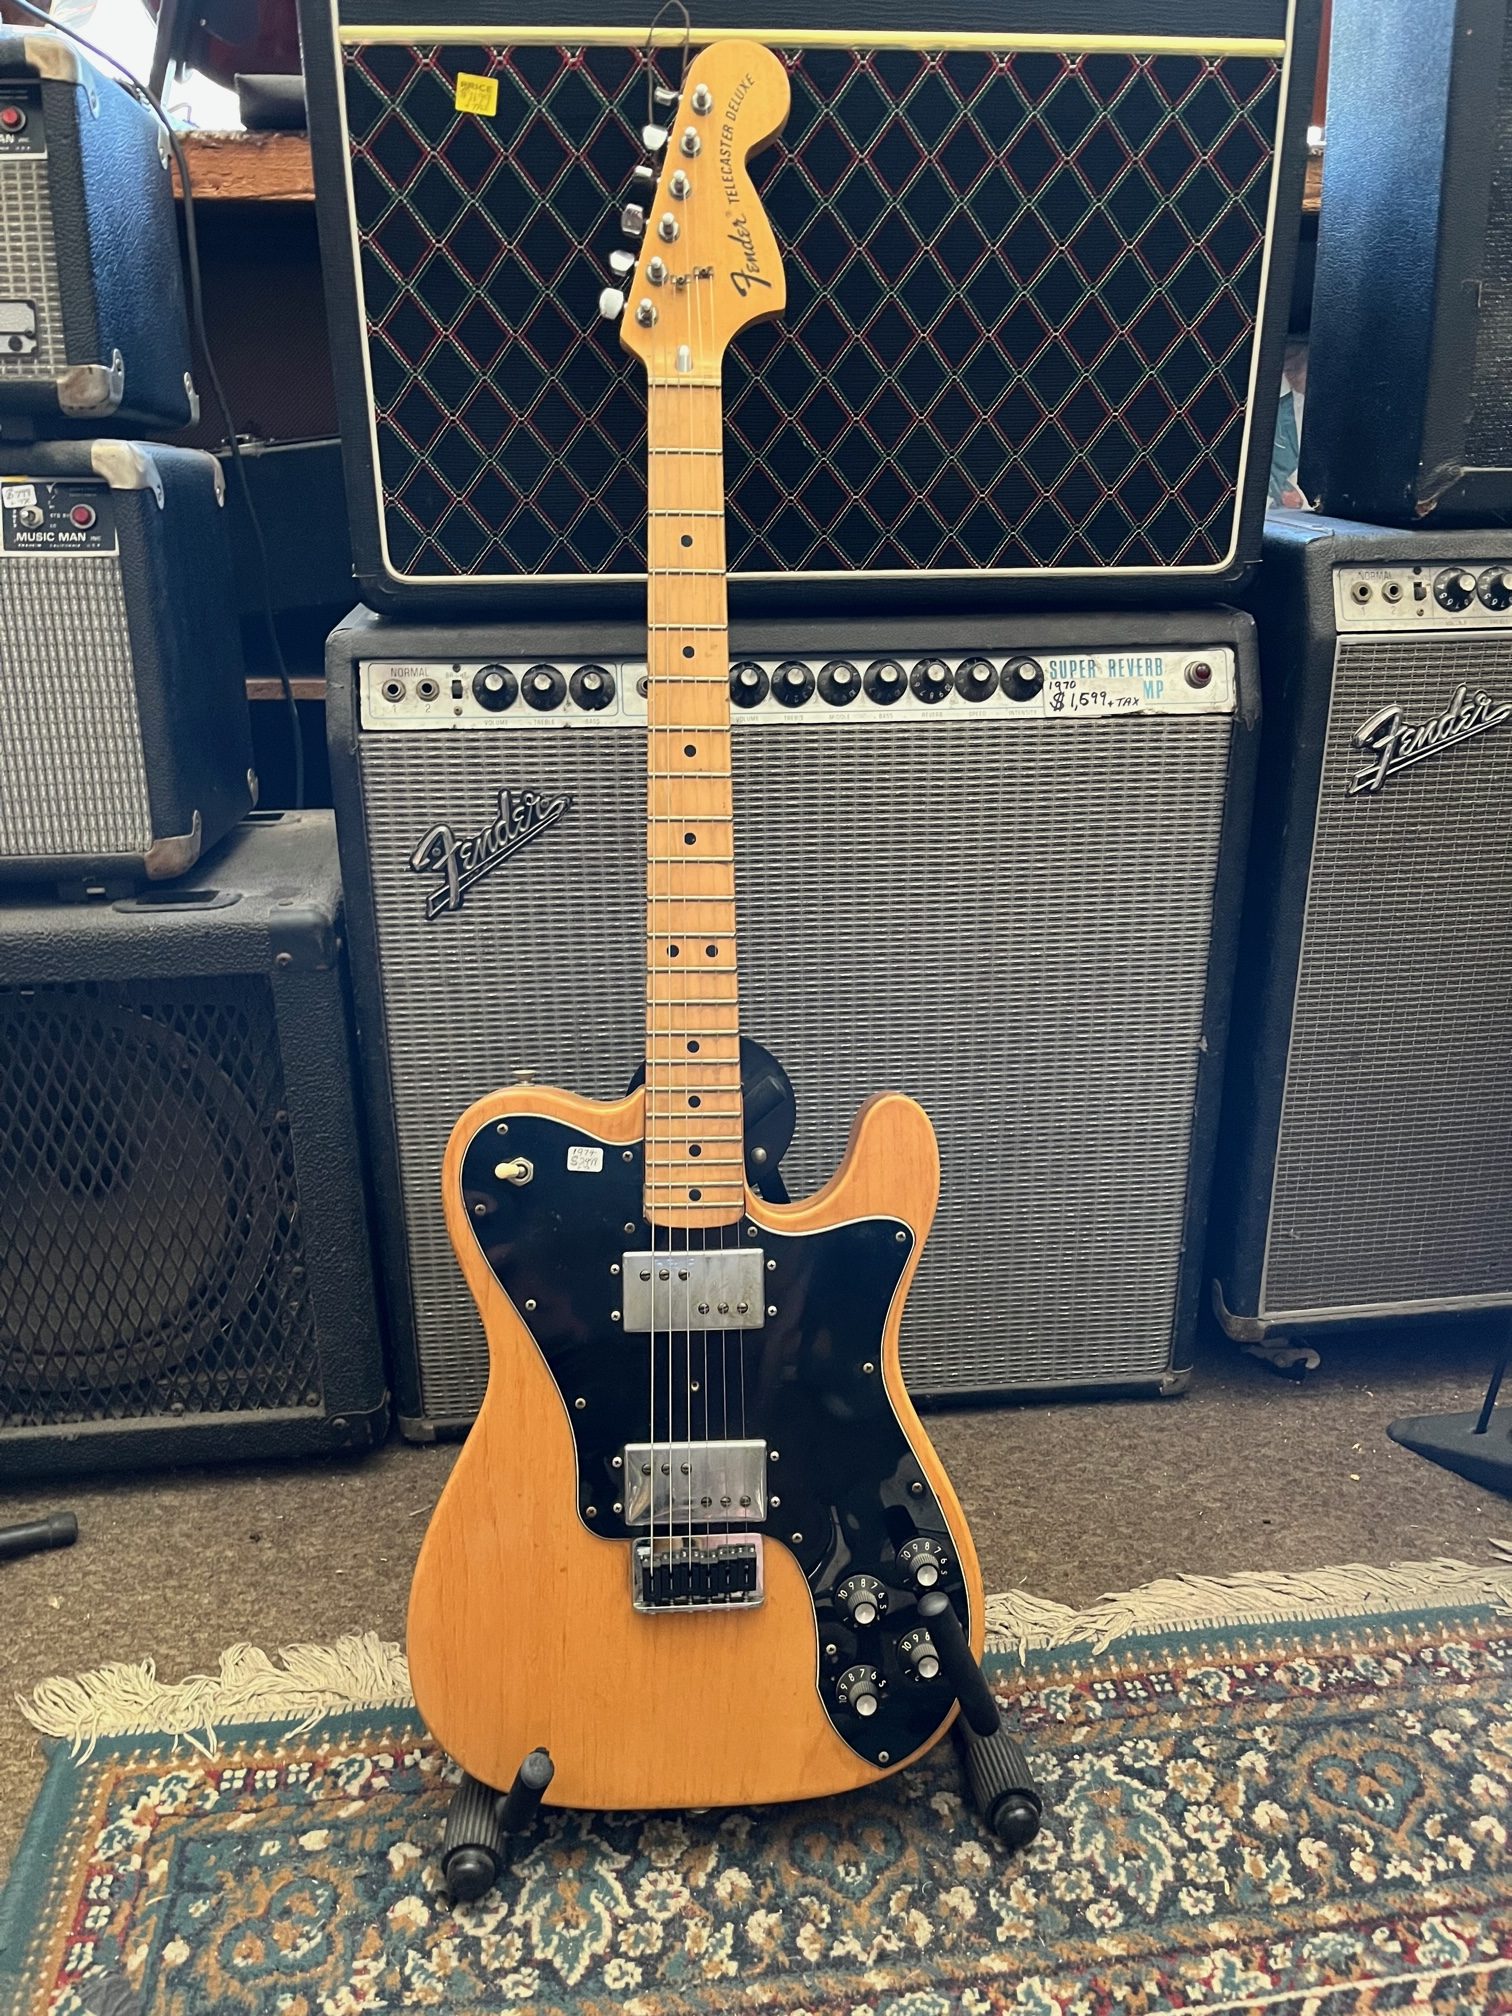 74′ TELECASTER DELUXE FACTORY FENDER HUMBUCKERS Was $3,200 W/ HSC NOW $2,550